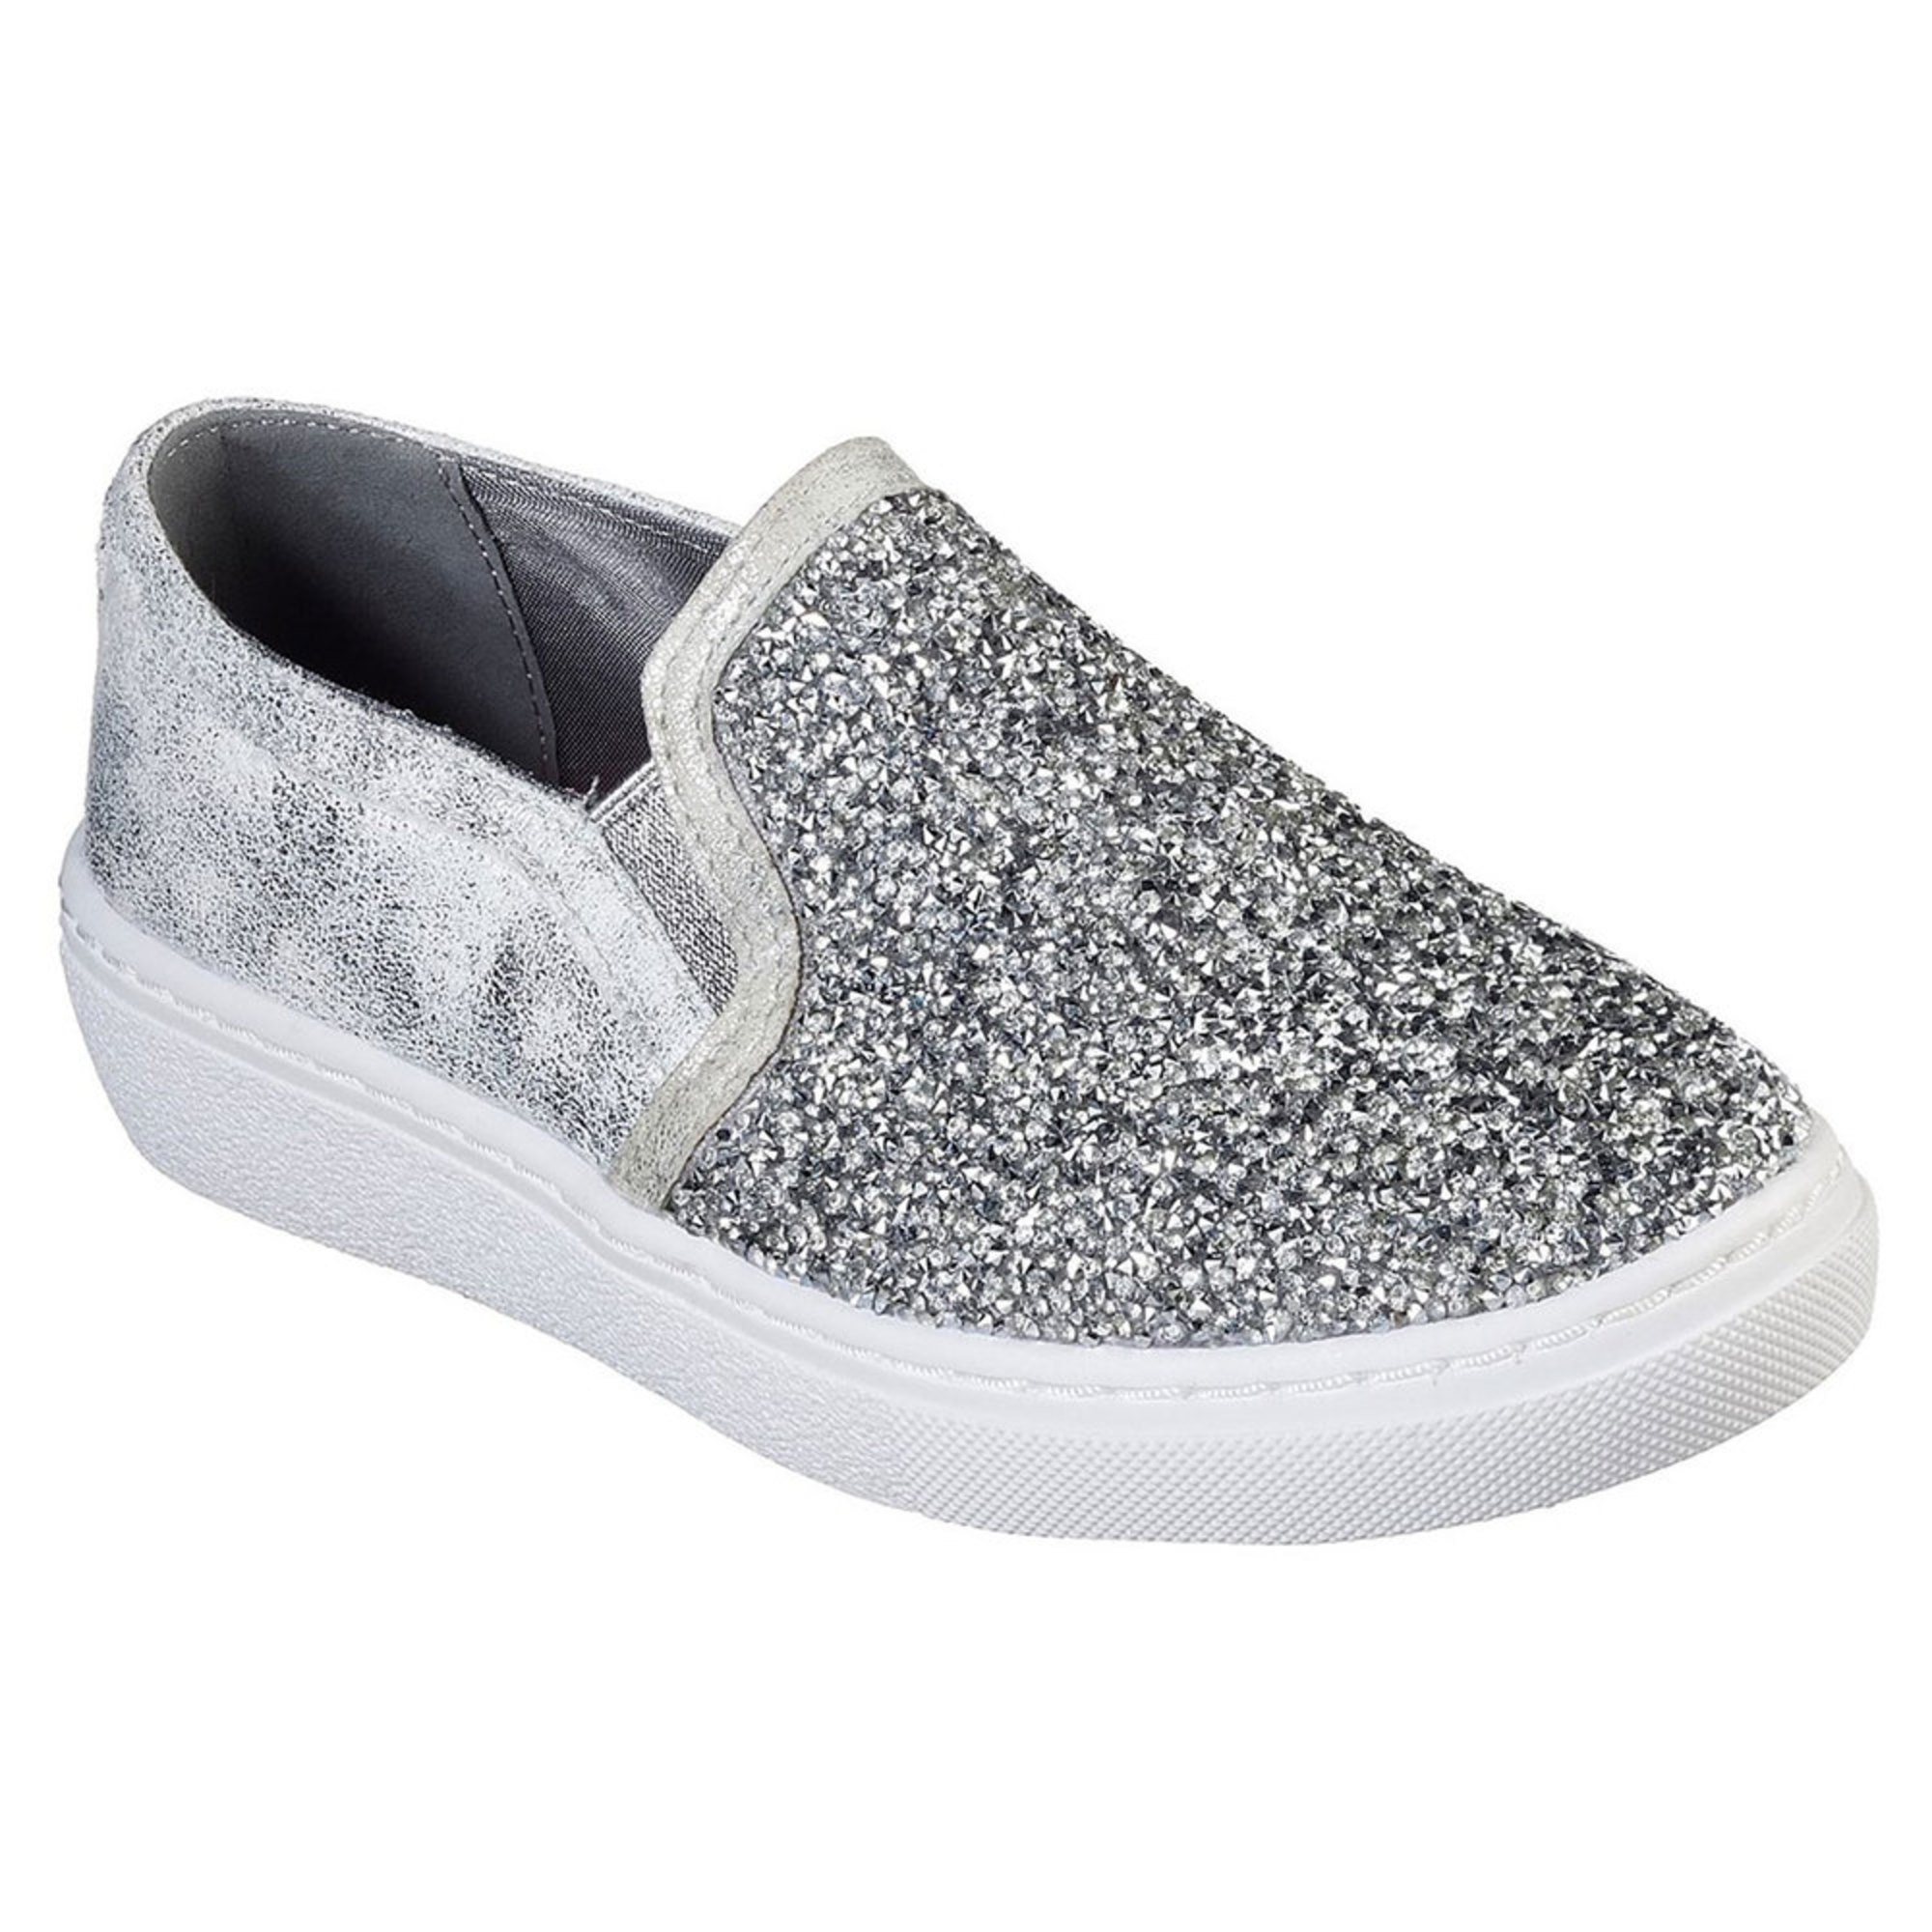 skechers glitter shoes Sale,up to 40 